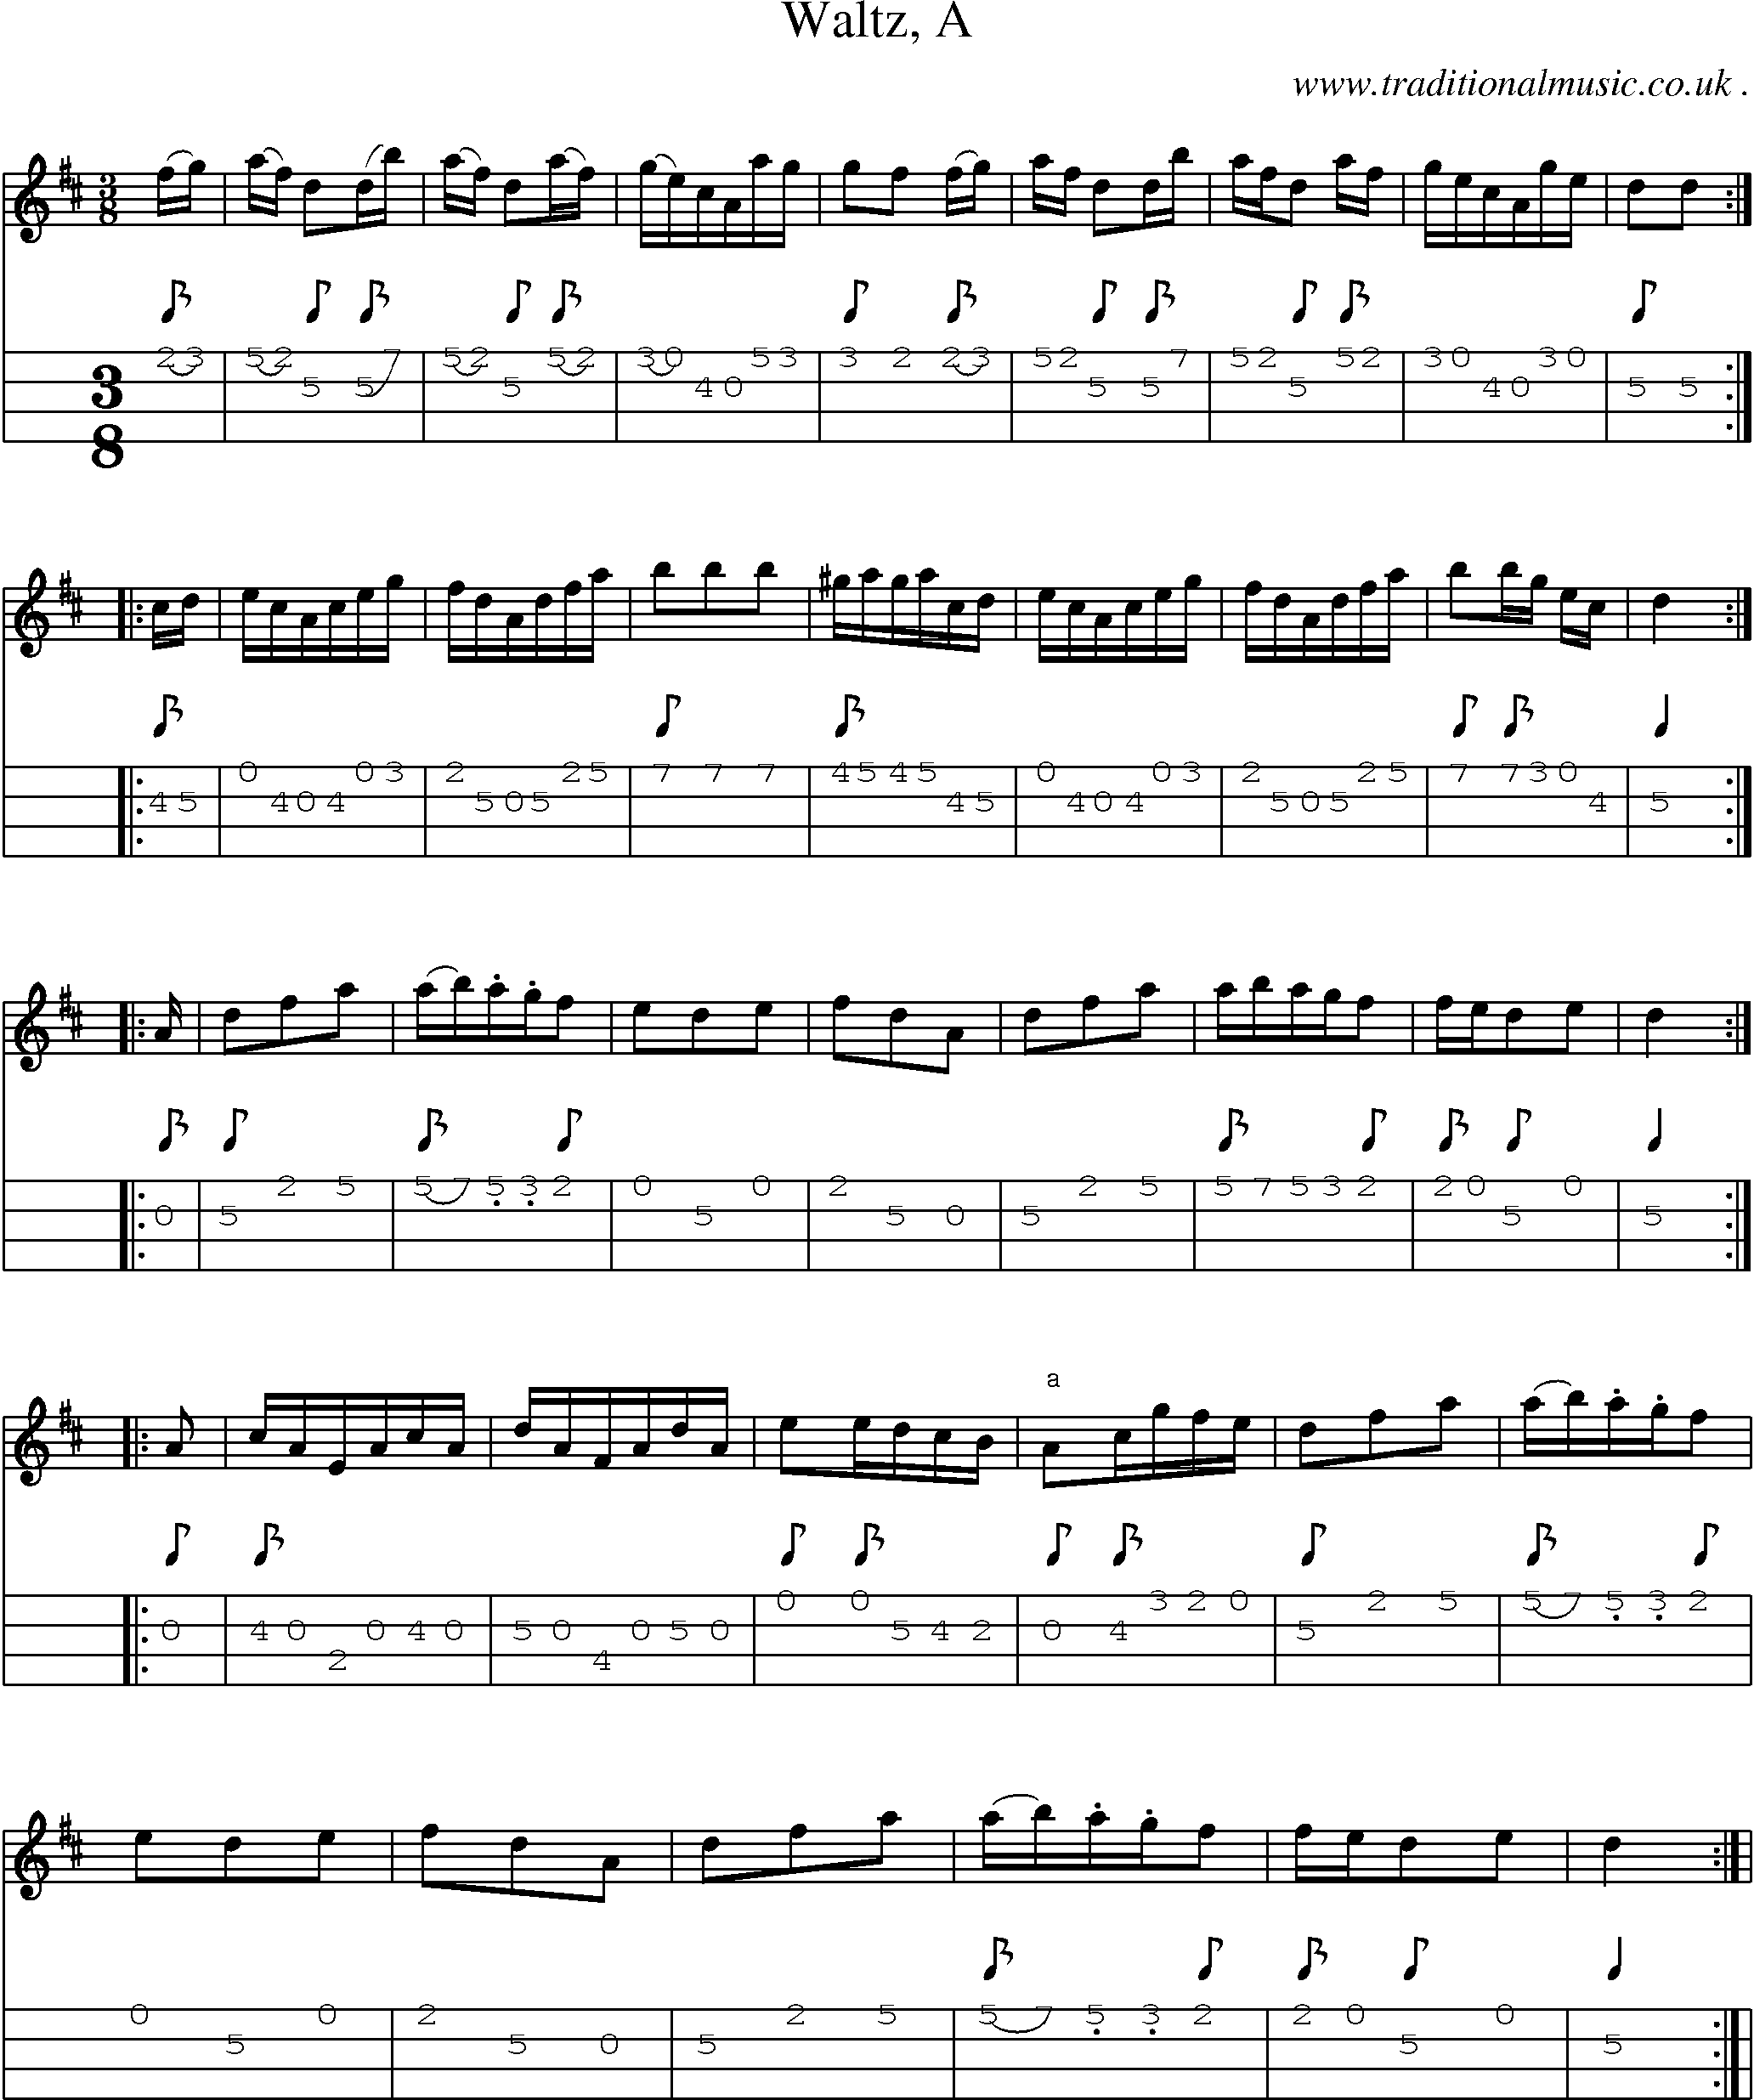 Sheet-Music and Mandolin Tabs for Waltz A